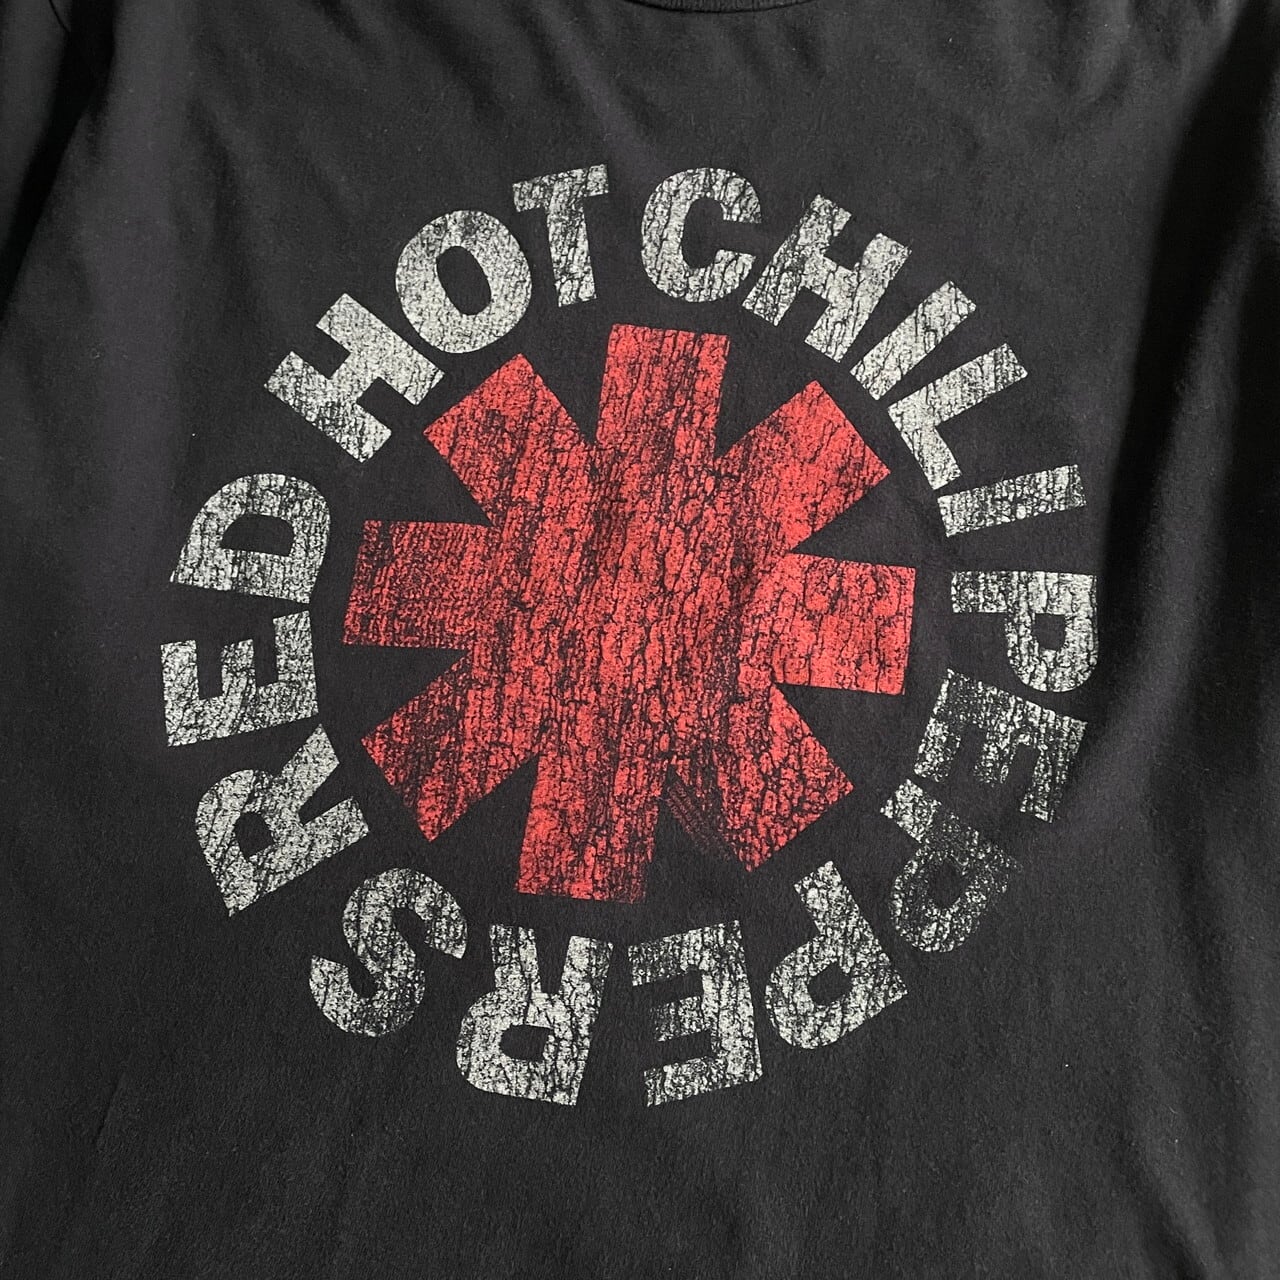 RED HOT CHILI PEPPERS" バンドTシャツ メンズL 古着 レッドホット